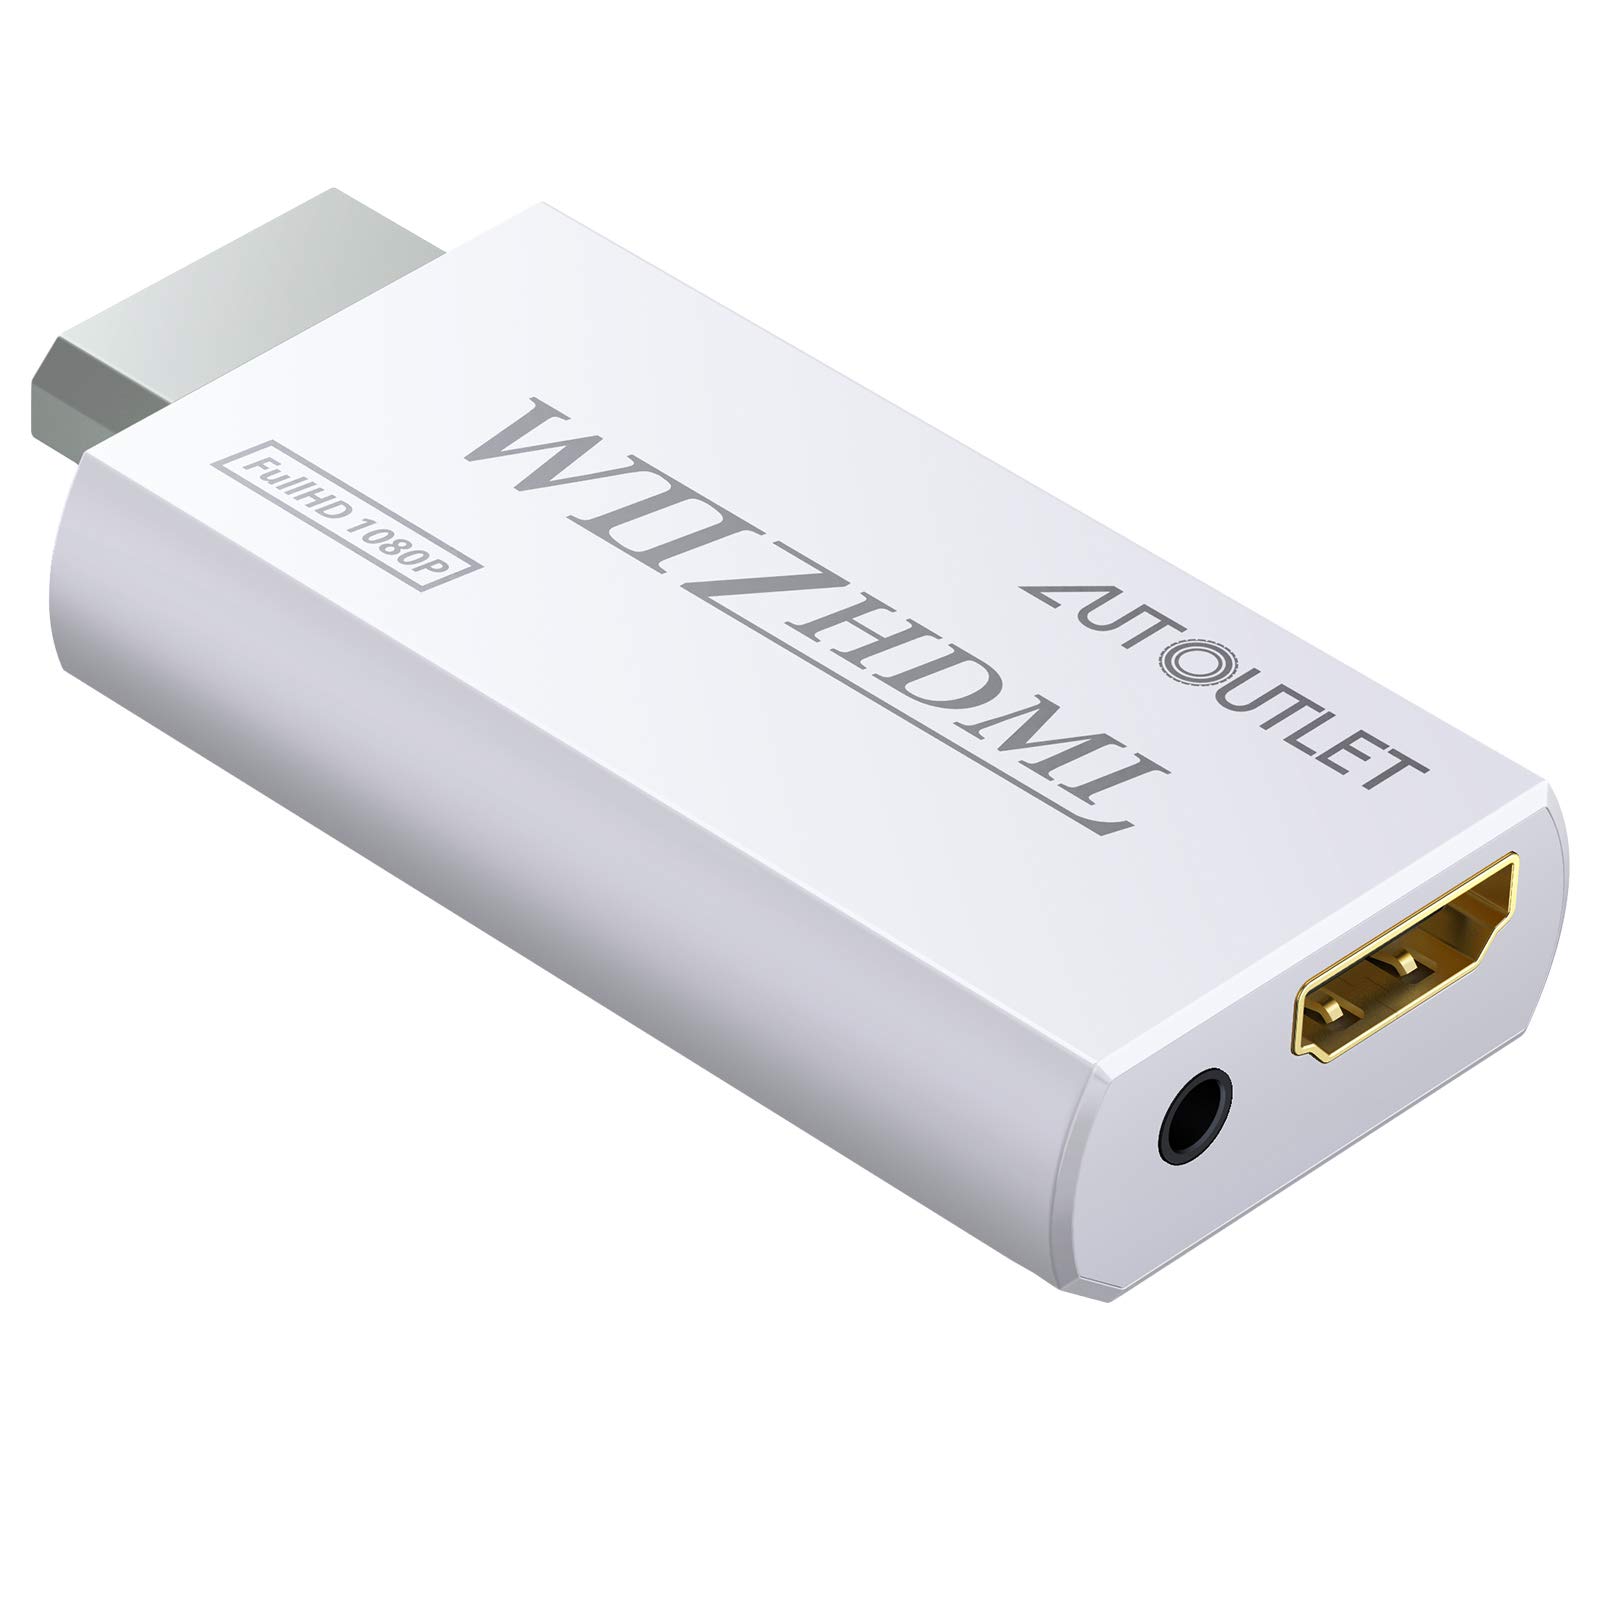 Wii to HDMI Converter 1080P for Full HD Device, Wii HDMI Adapter with 3,5mm Audio Jack&HDMI Output Compatible with Nintendo Wii, Wii U, HDTV, Monitor-Supports All Wii Display Modes 720P